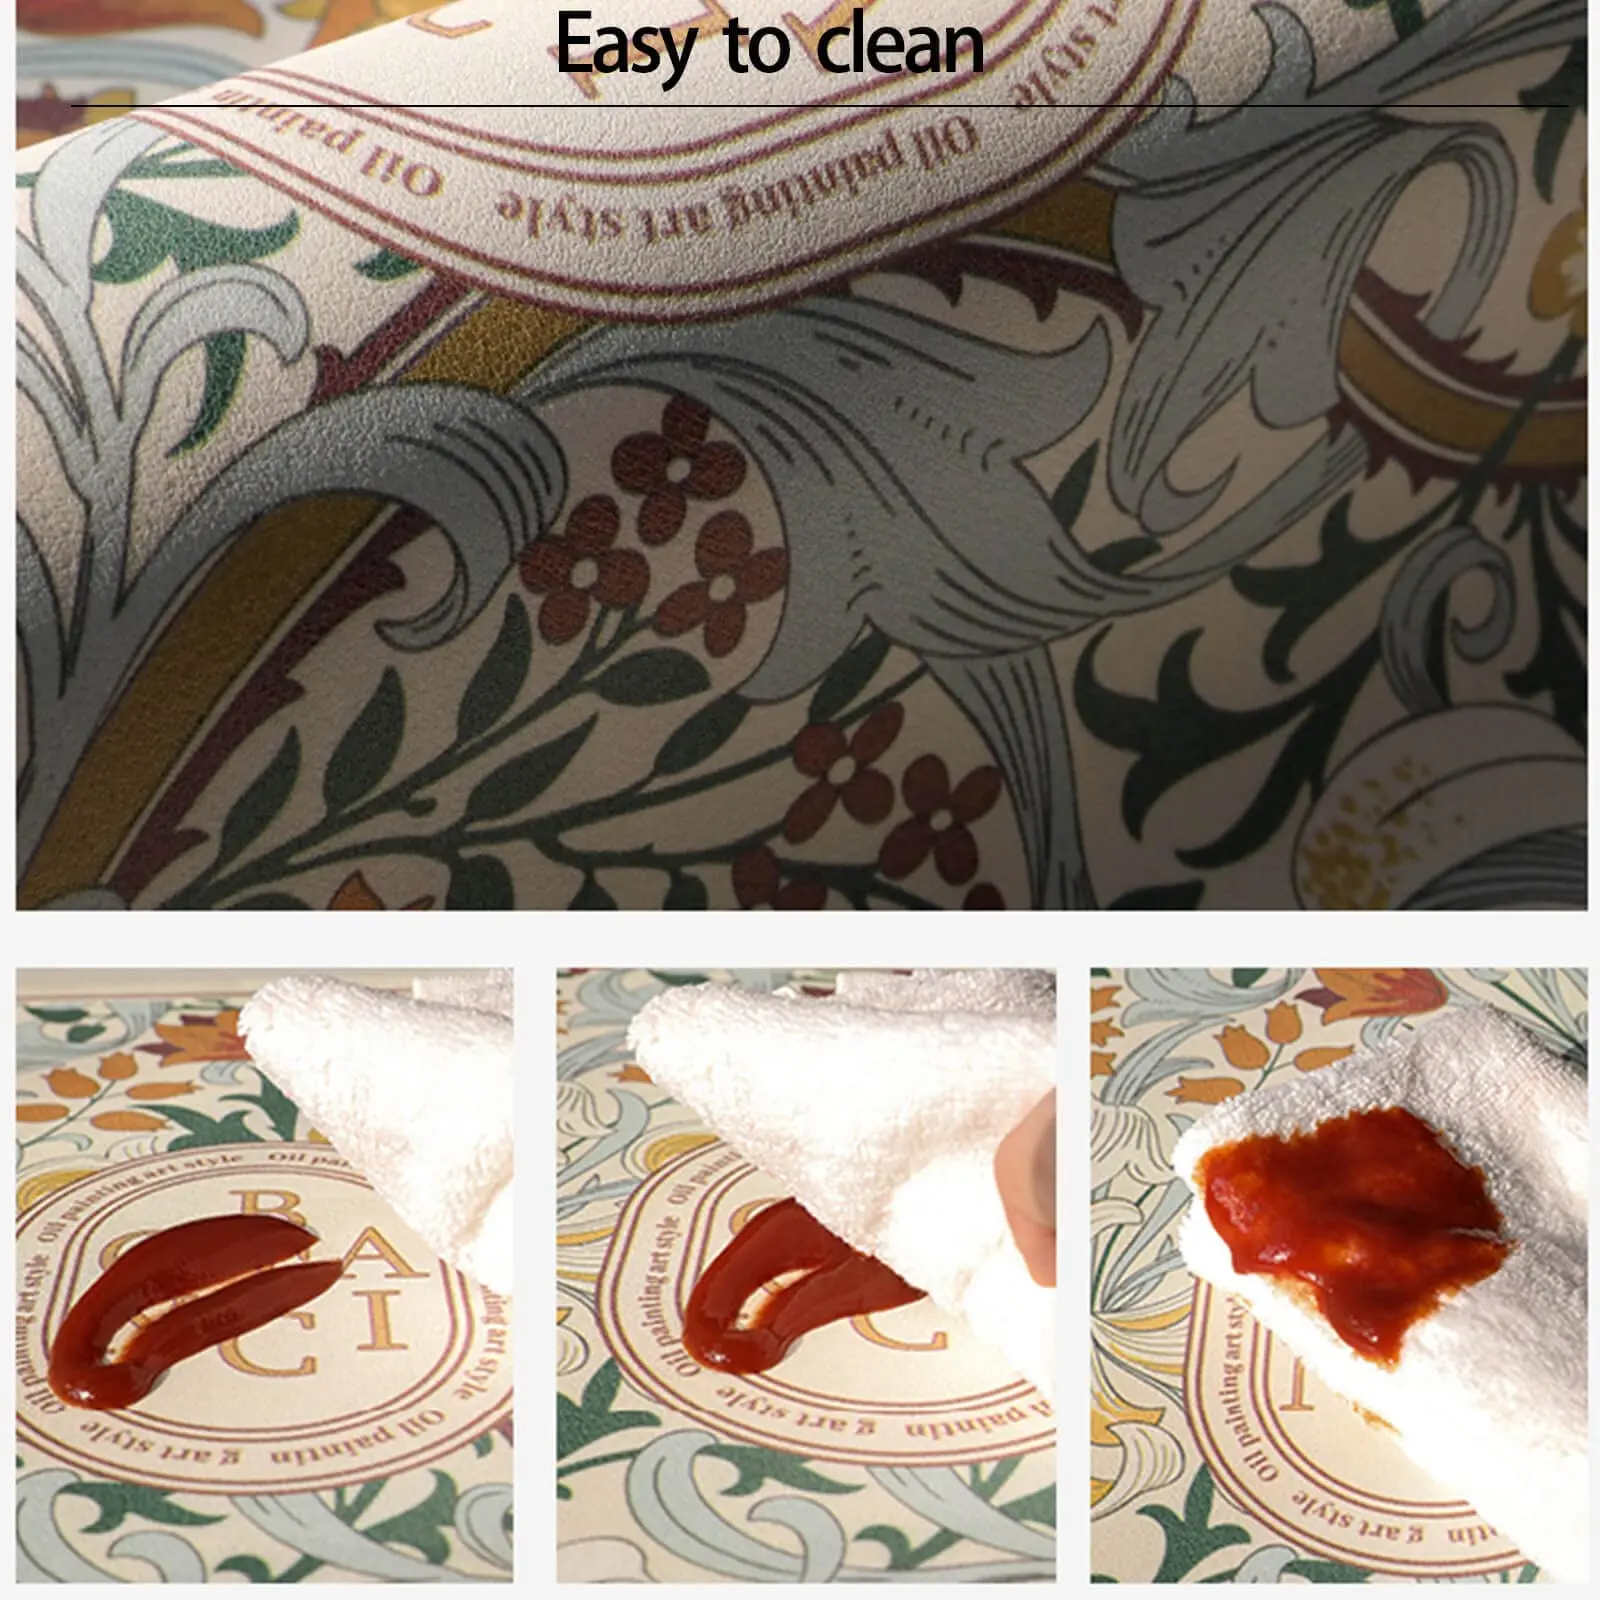 https://ae01.alicdn.com/kf/S58ebdd178e4044e78baf98c743be300fb/Fantasy-Style-Faucet-Draining-Mat-Self-Absorbent-Draining-Mat-for-Kitchen-Counter-Vintage-Floral-Plates-Dish.jpg